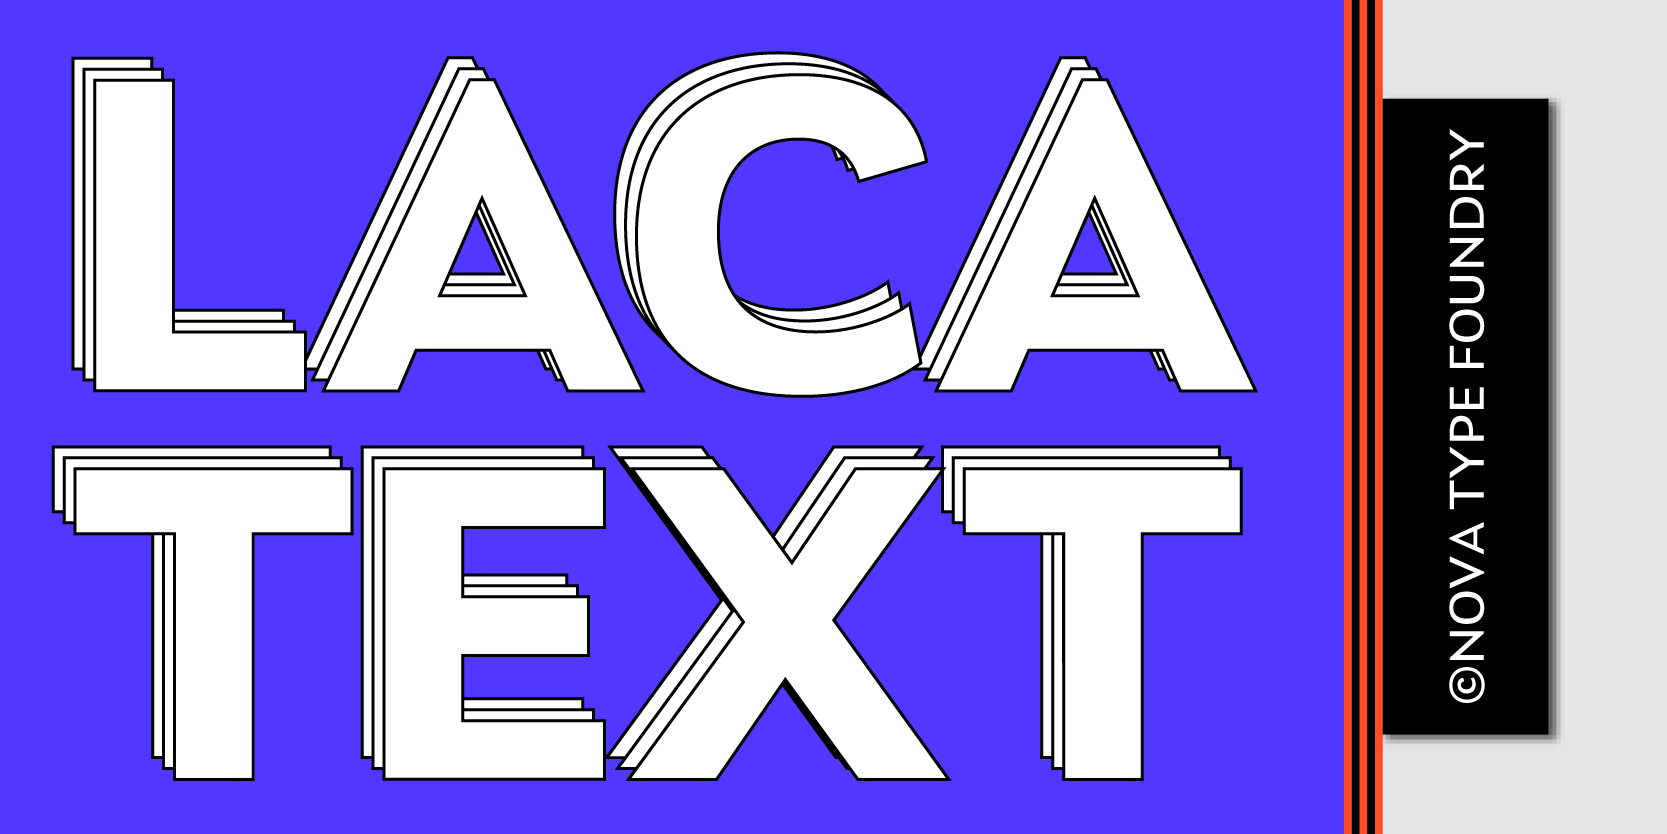 Card displaying Laca Text typeface in various styles